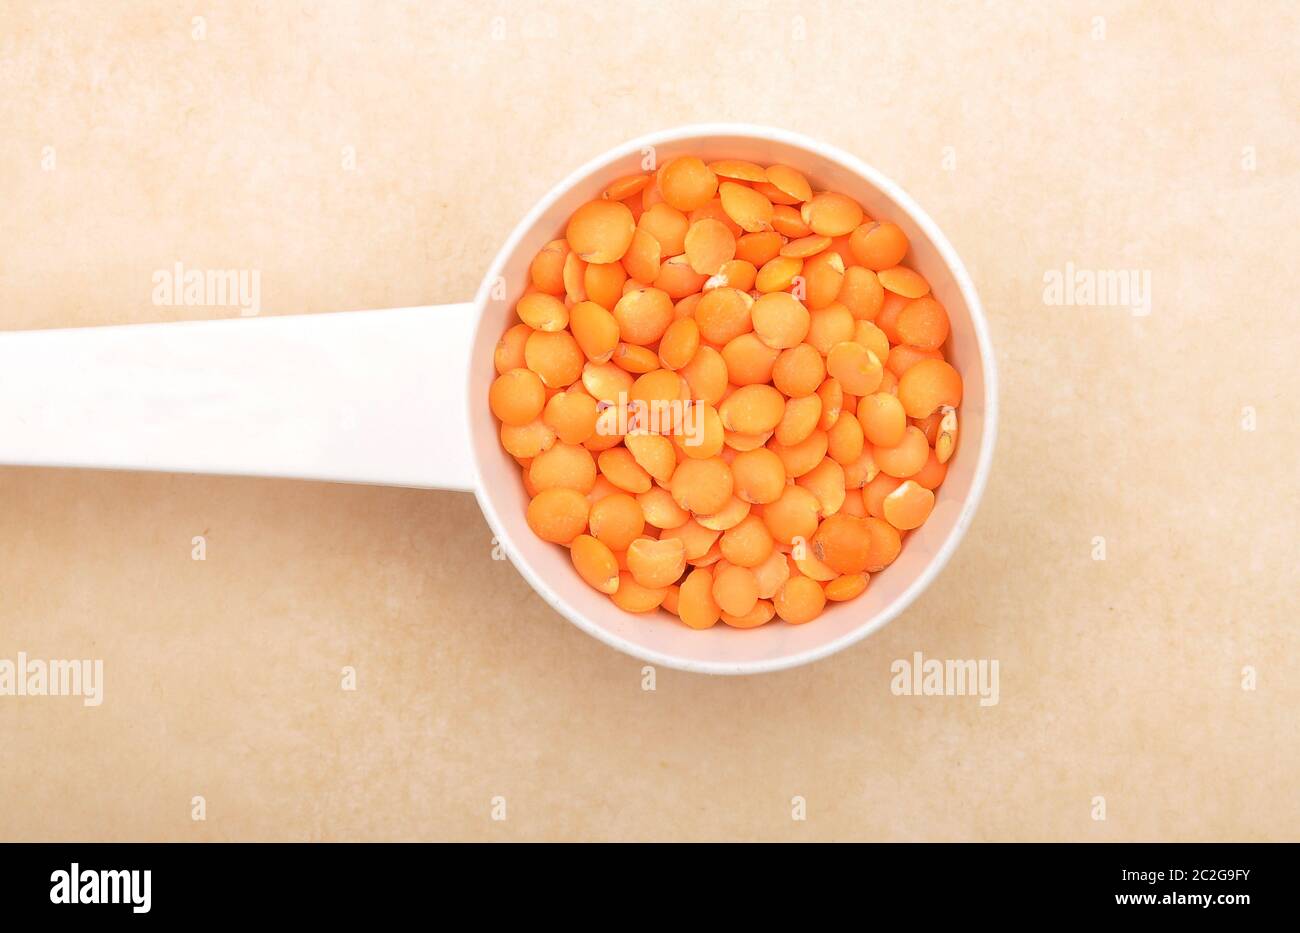 Red lentils on measuring spoon and brown background Stock Photo